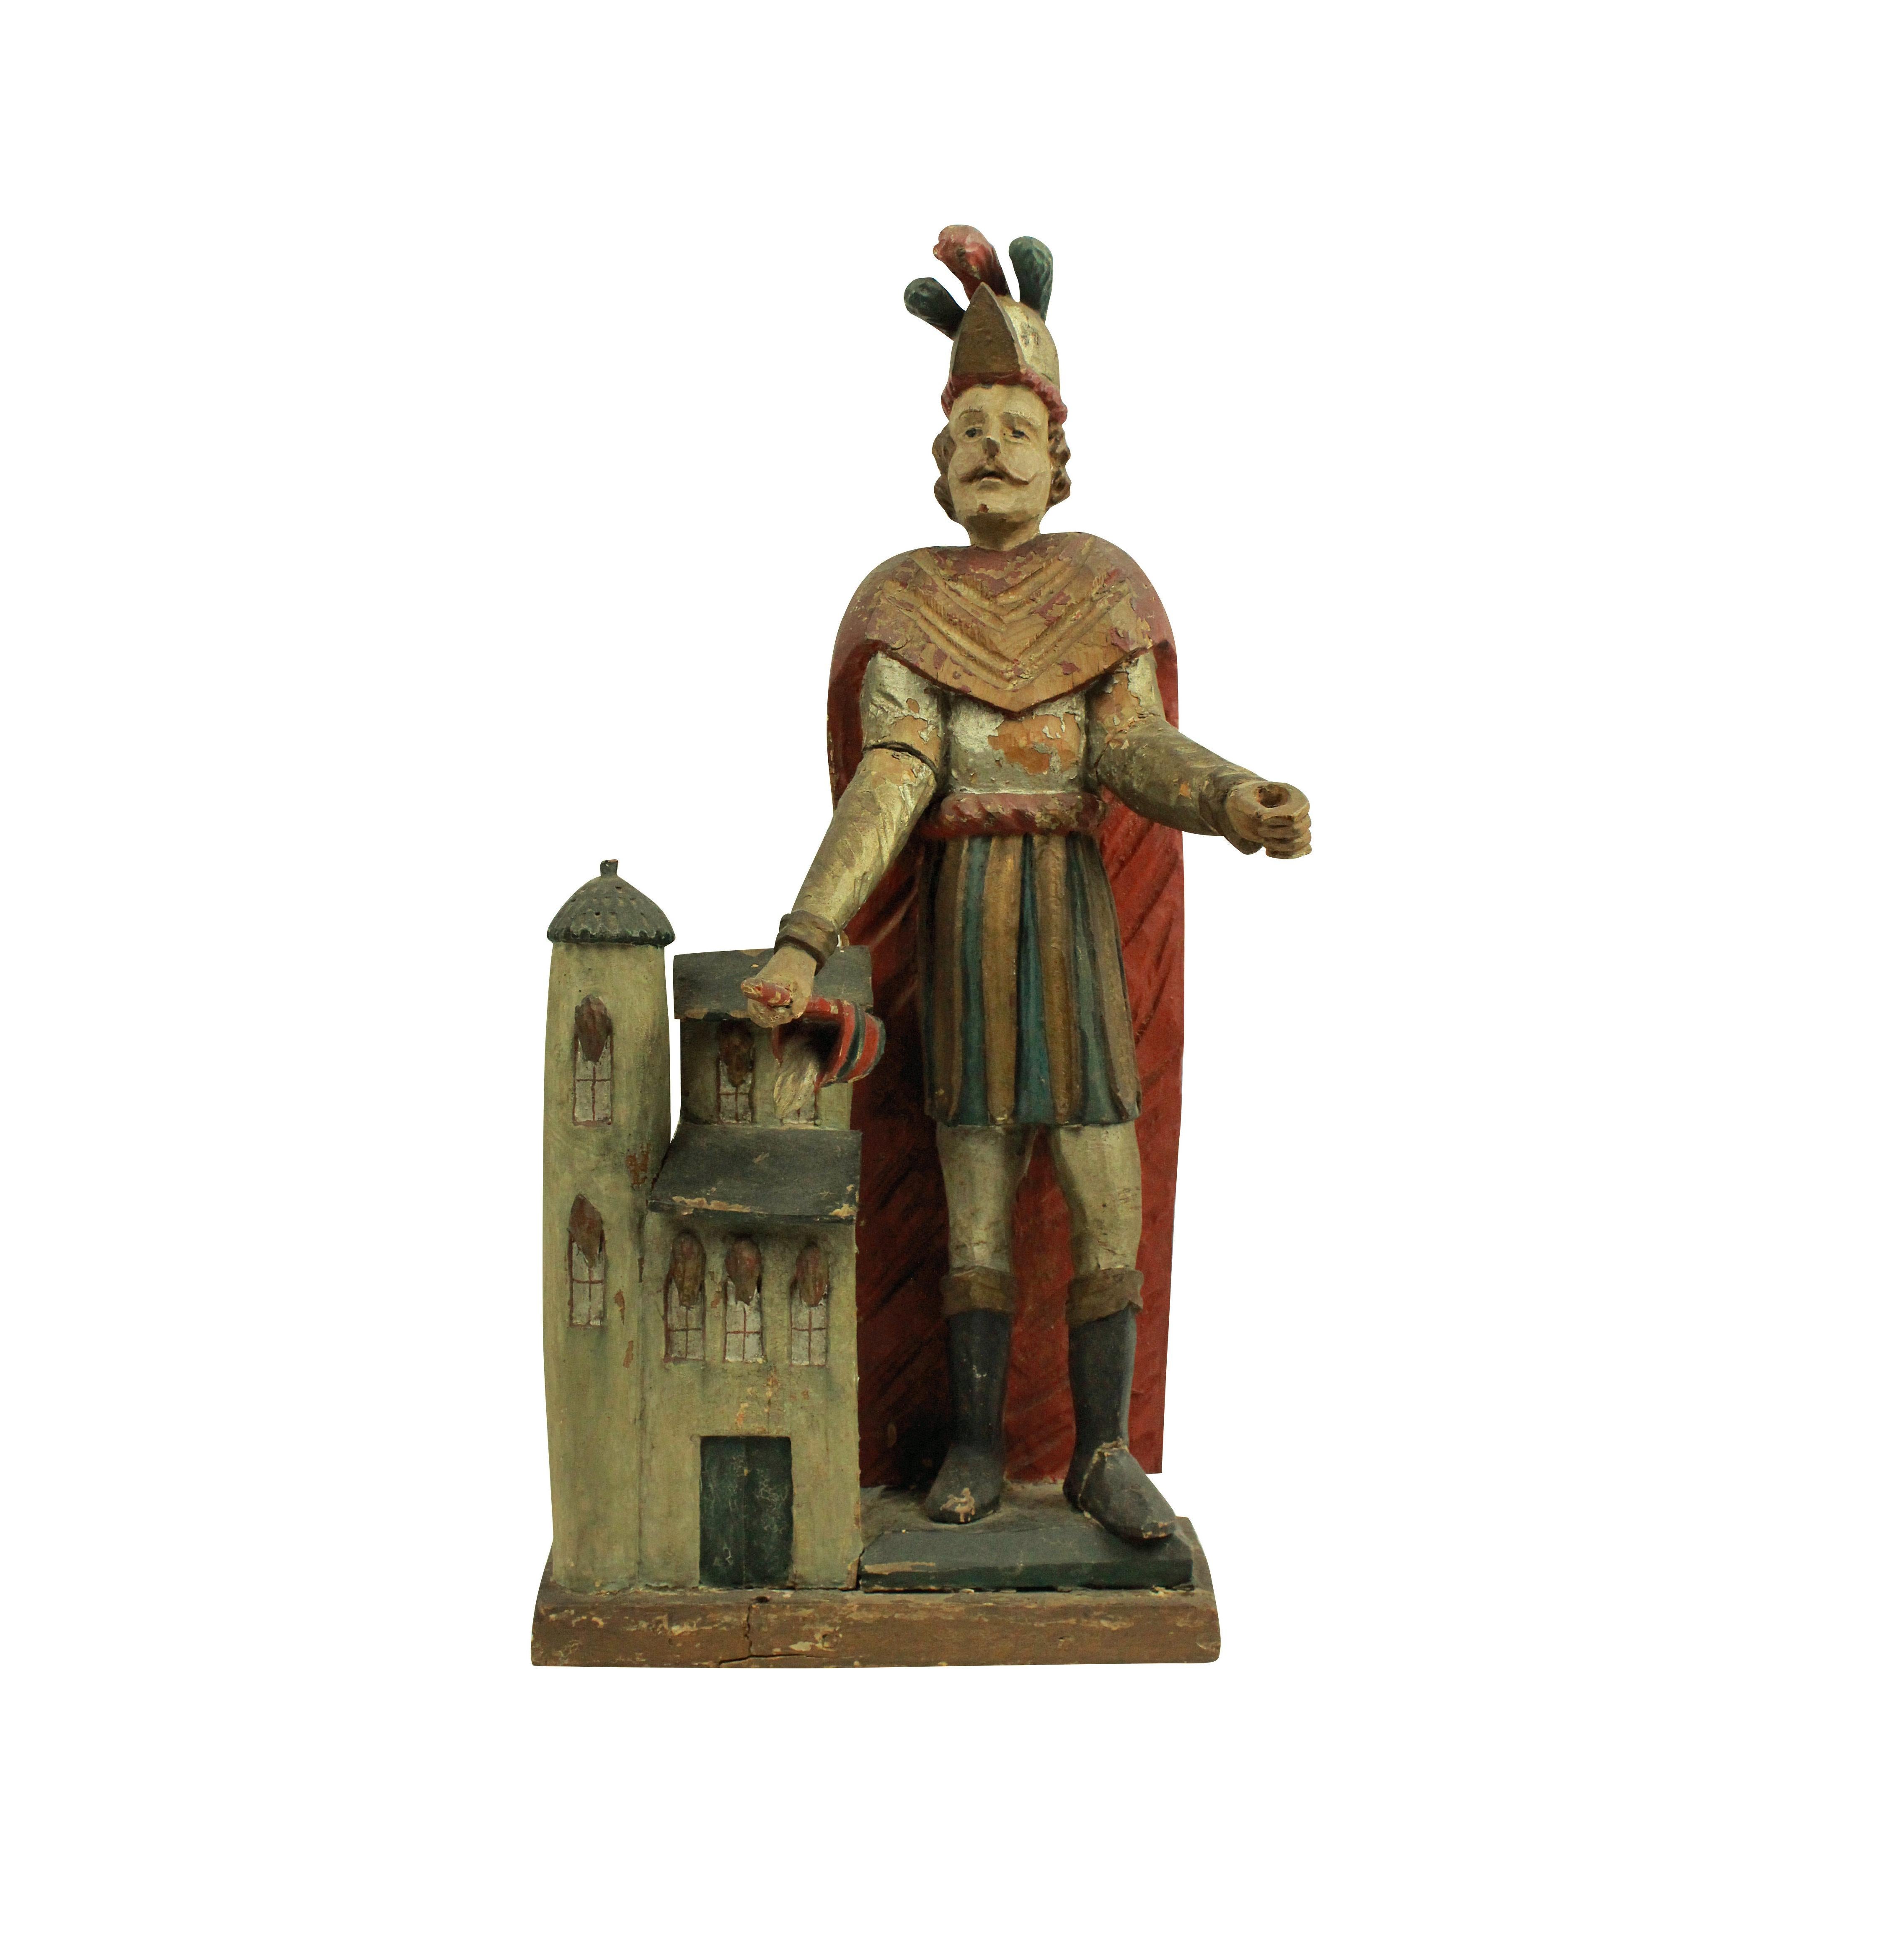 A French late 18th century statue of St Florian, in carved fruitwood with polychrome paints. Missing his spear.

The Patron Saint of Austria, chimney sweeps, fire fighters and brewers.